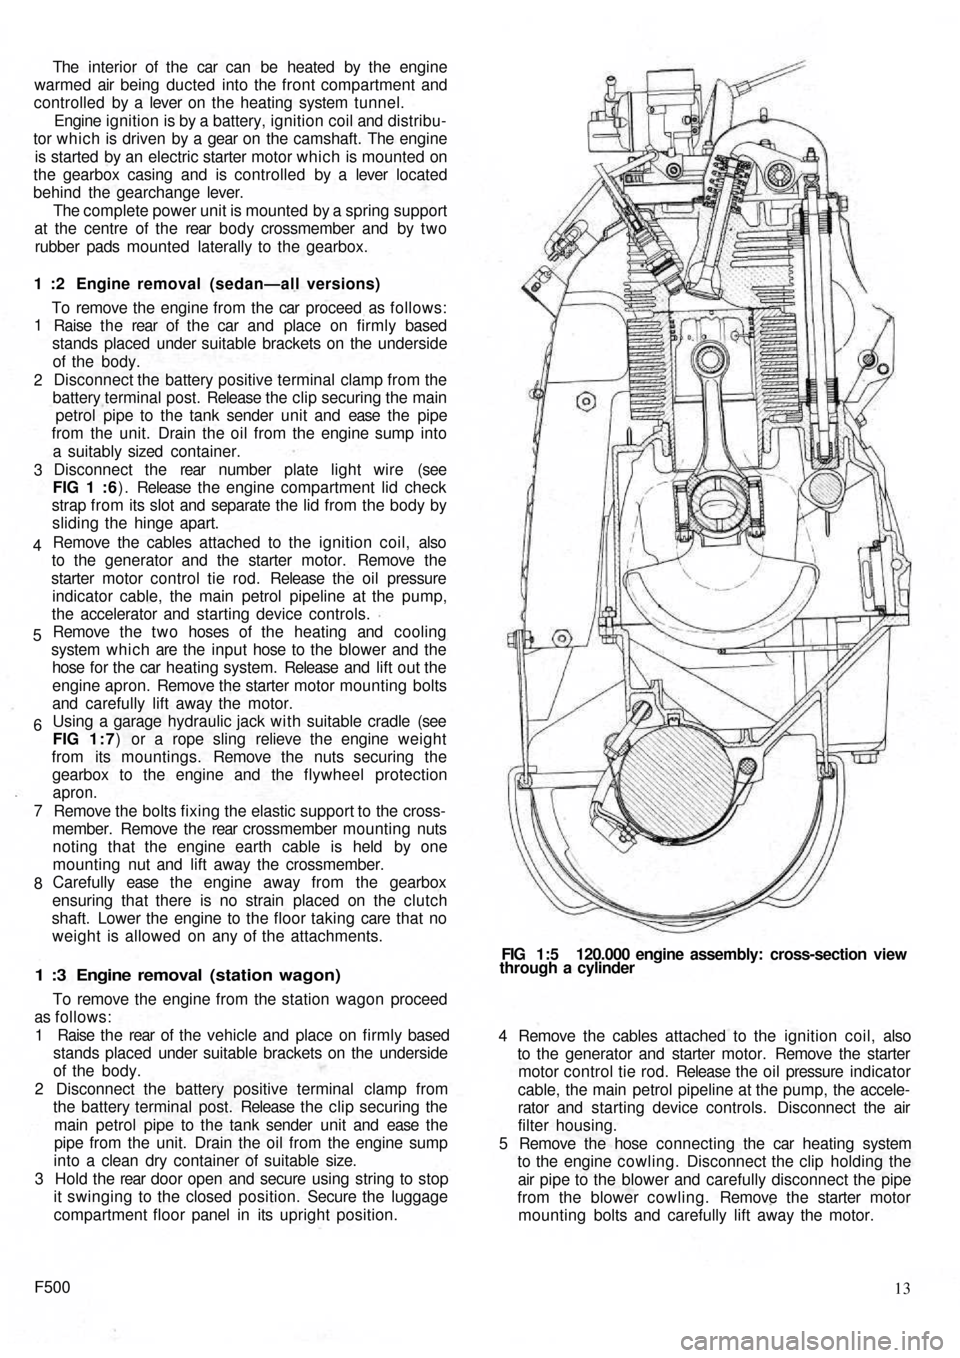 FIAT 500 1961 1.G Workshop Manual The  interior of the  car can  be heated by the engine
warmed air being ducted into the front compartment and
controlled  by a  lever on the heating system tunnel.
Engine ignition is by a battery, ign